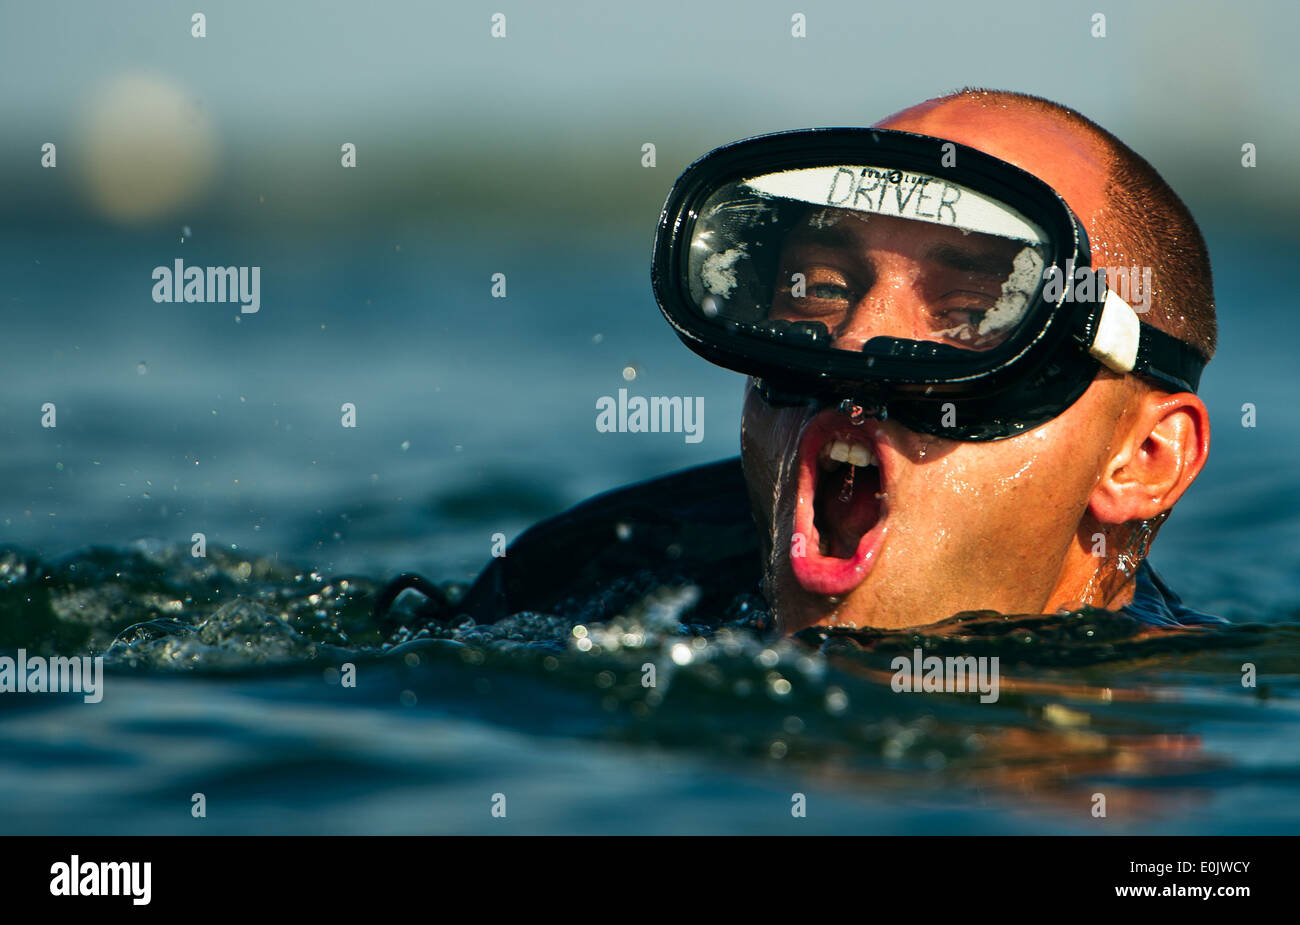 An Air Force Pararescue Jumper (PJ) trainee swims to the finish point Aug. 17, 2011, at Calaveras Lake, Texas. During a lake co Stock Photo